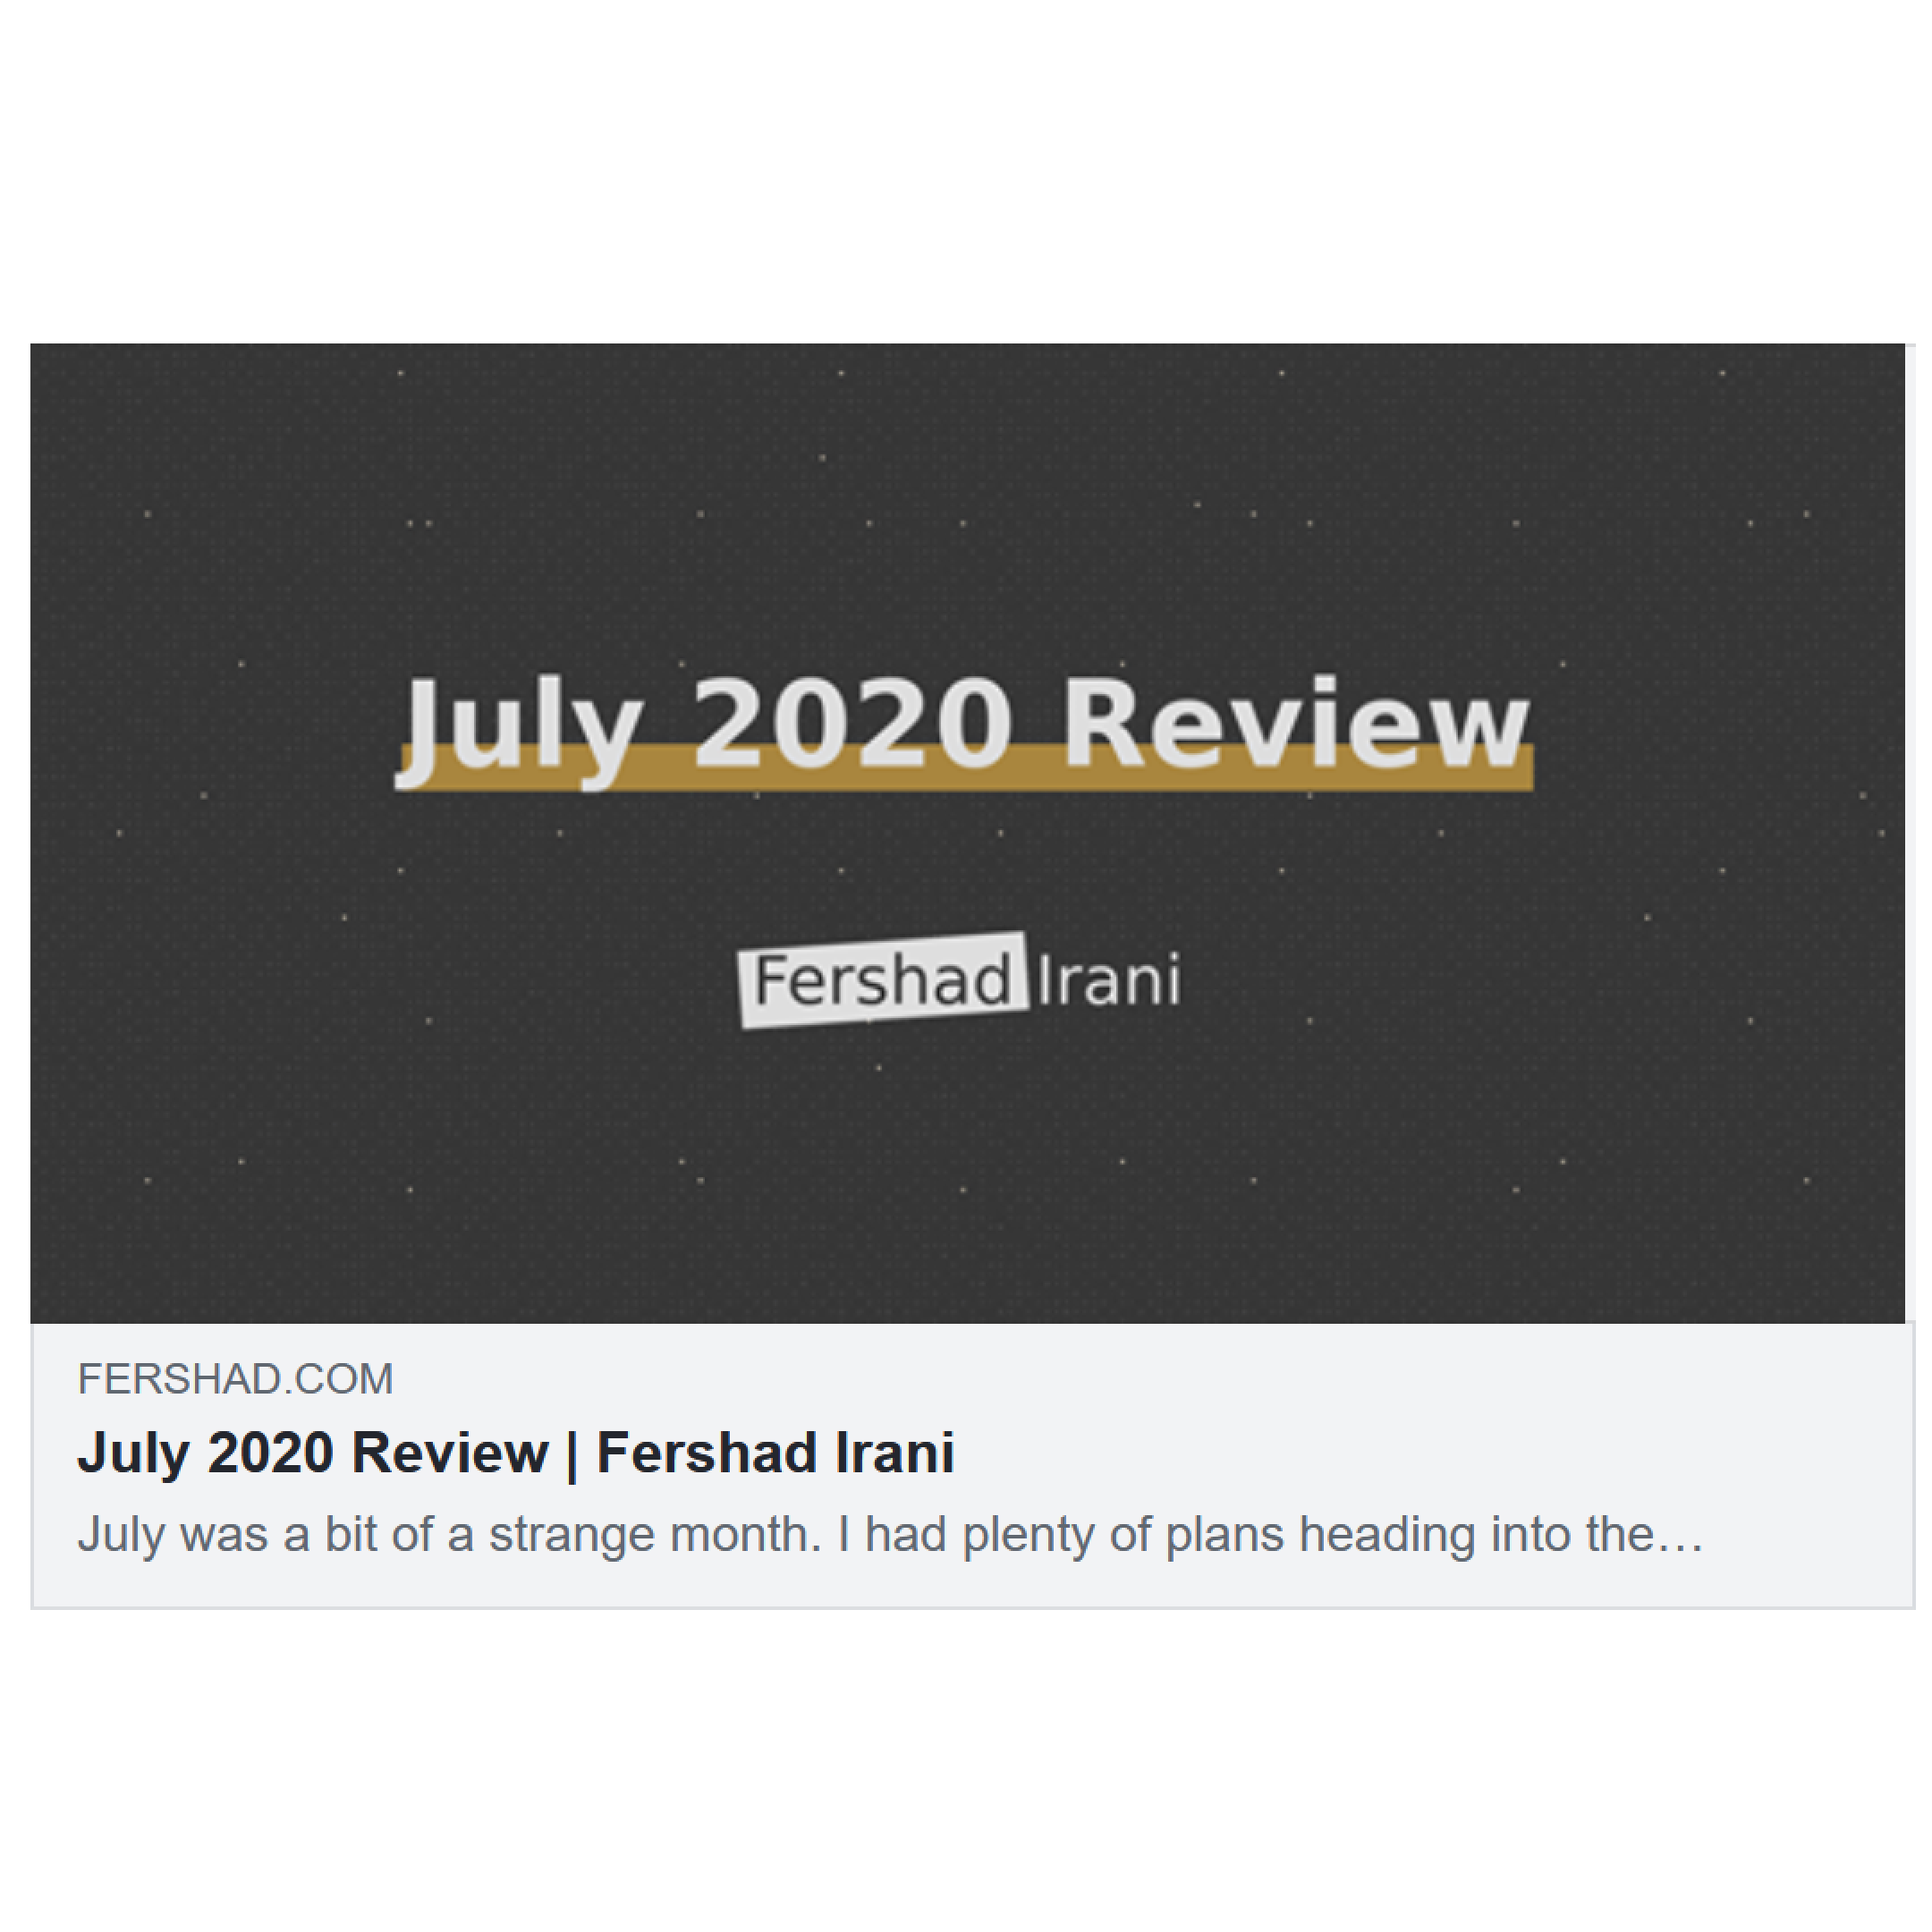 Screenshot of Facebook Sharing Debugger preview for July 2020 Review blog post with Open Graph tags.